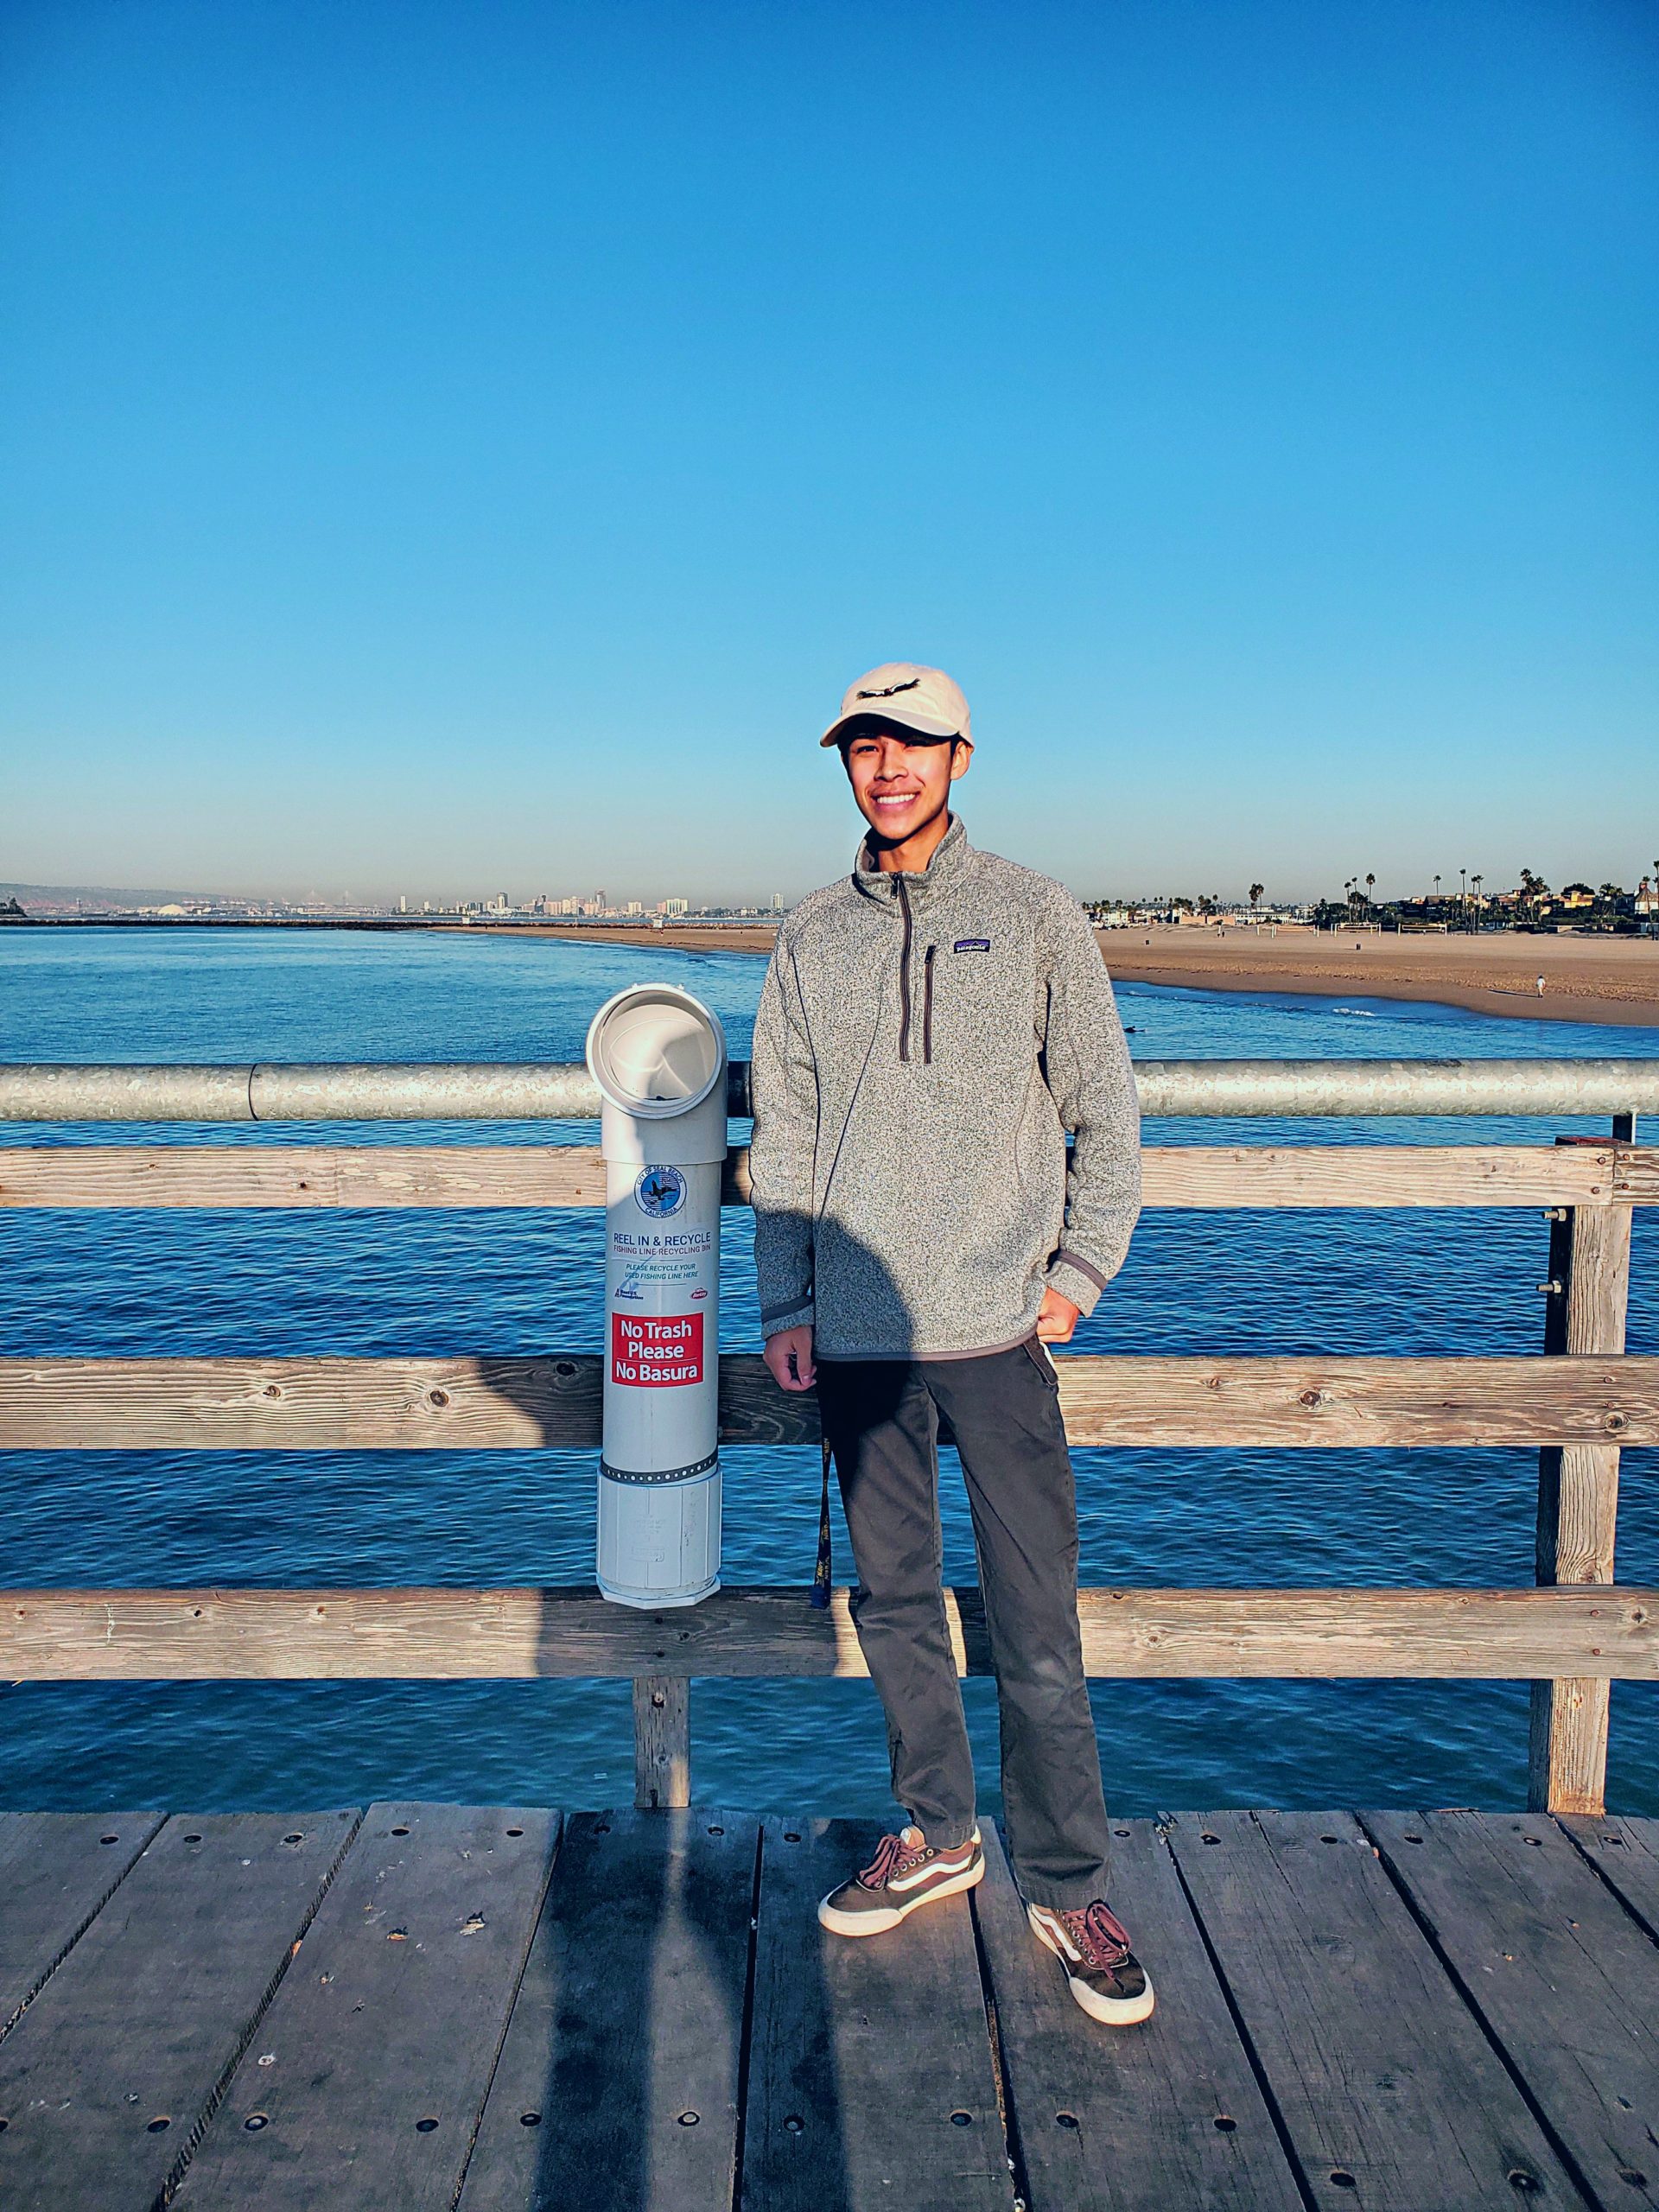 How Our Intern Helped Bring Fishing Line Recycling to Seal Beach